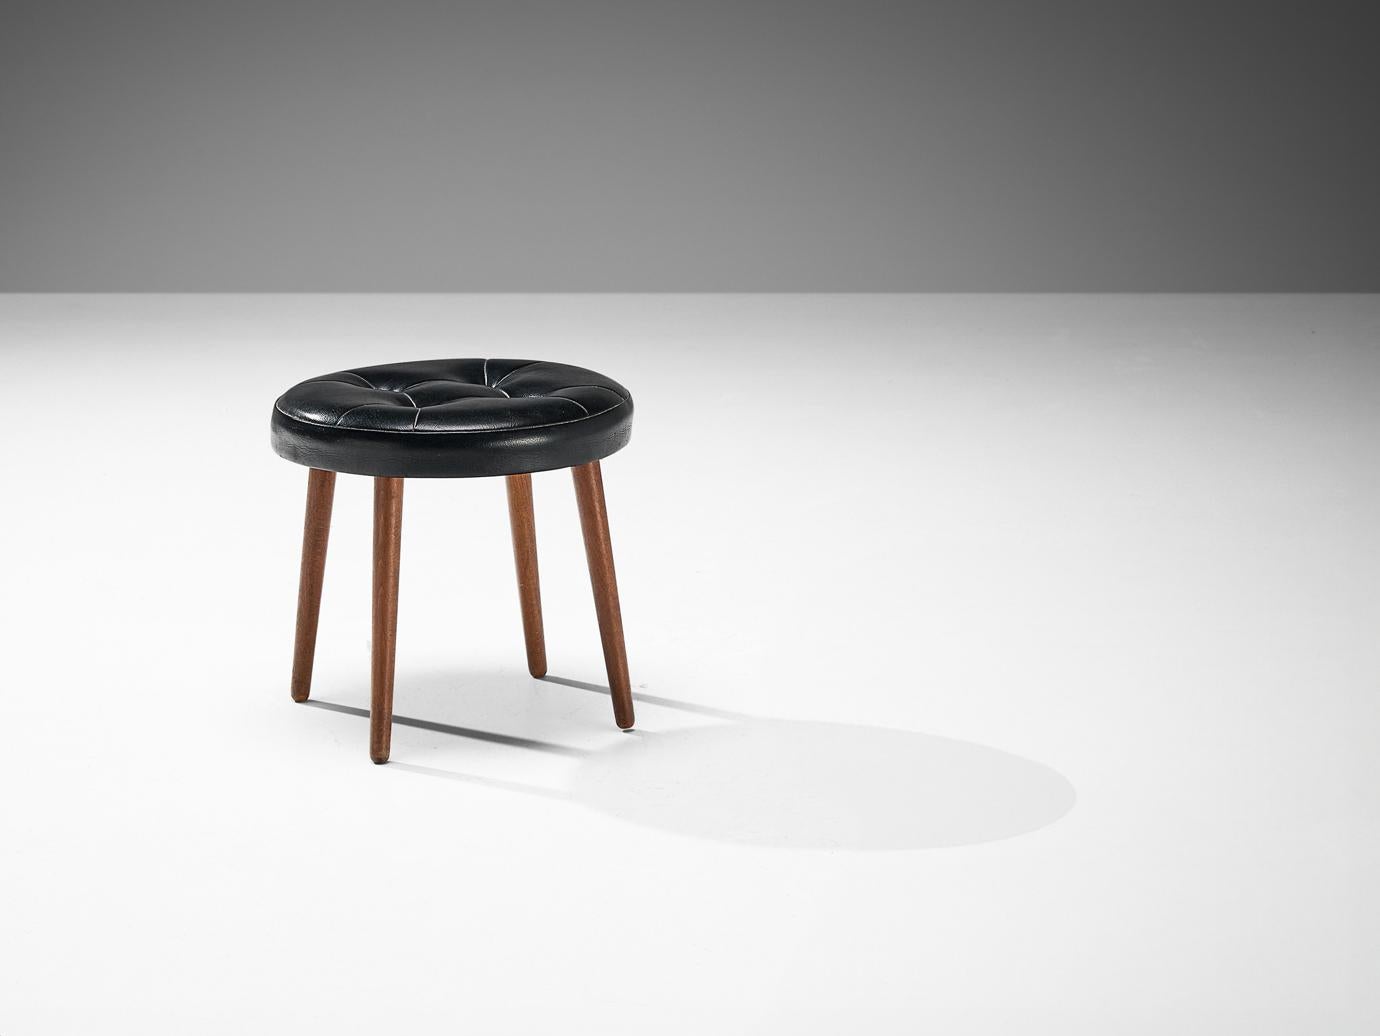 Stool, teak, leatherette, Denmark, 1960s

A sleek stool made in Denmark in the 1960s. This midcentury modern design is a wonderful addition to any interior, due to its minimalist aesthetic. The stool is equipped with a round, tufted cushion,